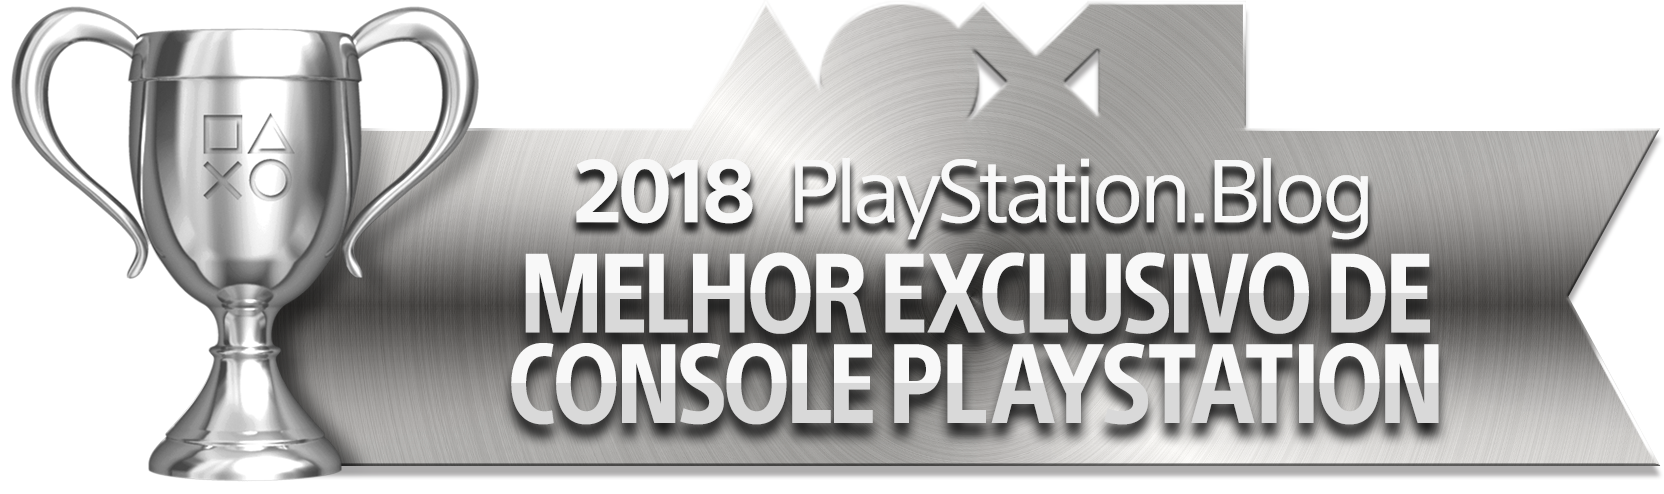 Best PlayStation Console Exclusive - Silver